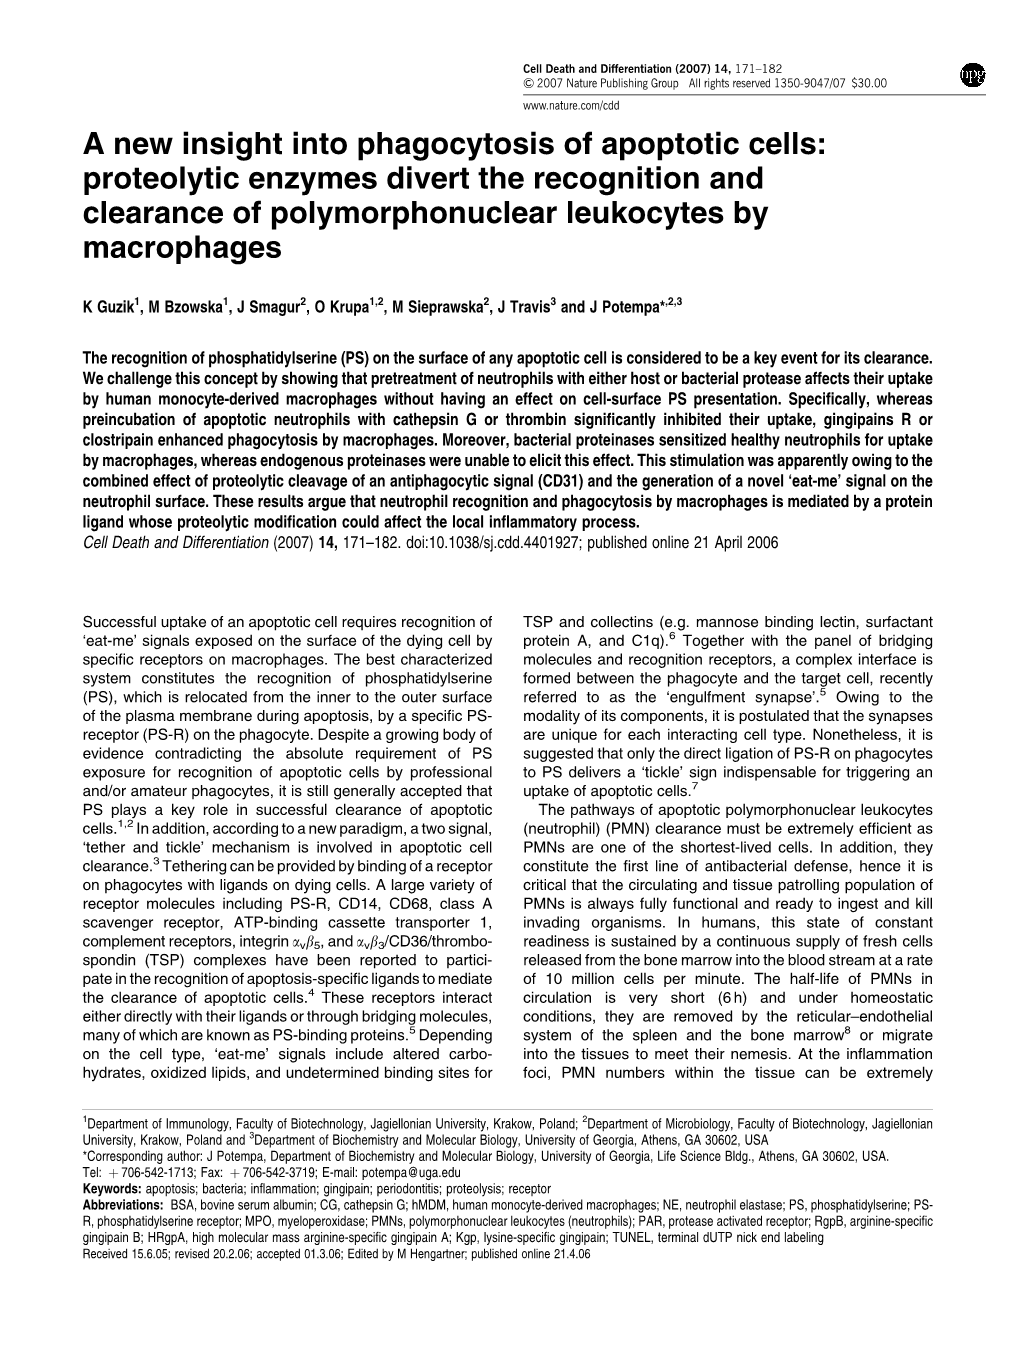 A New Insight Into Phagocytosis of Apoptotic Cells: Proteolytic Enzymes Divert the Recognition and Clearance of Polymorphonuclear Leukocytes by Macrophages